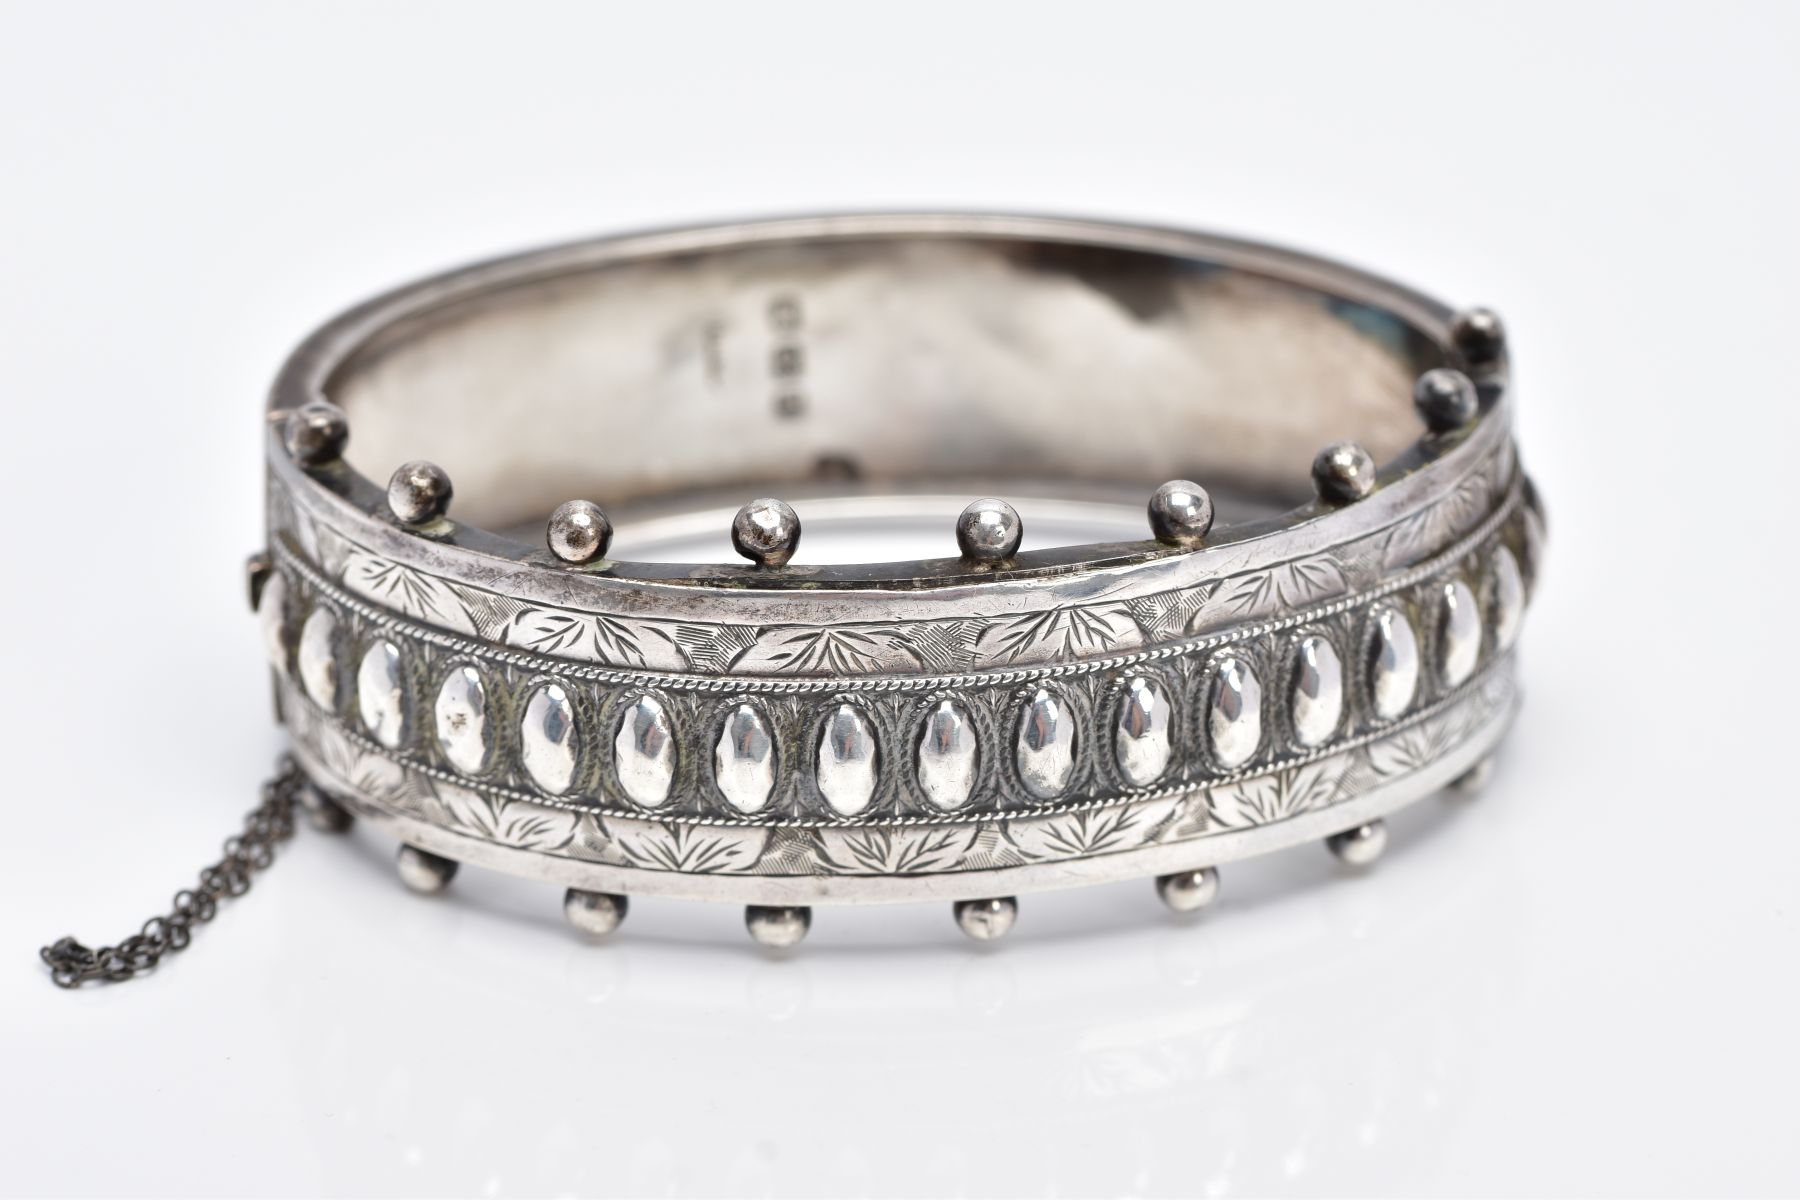 A VICTORIAN SILVER BANGLE, applied bead word decoration and half engraved, measuring 20.0mm in